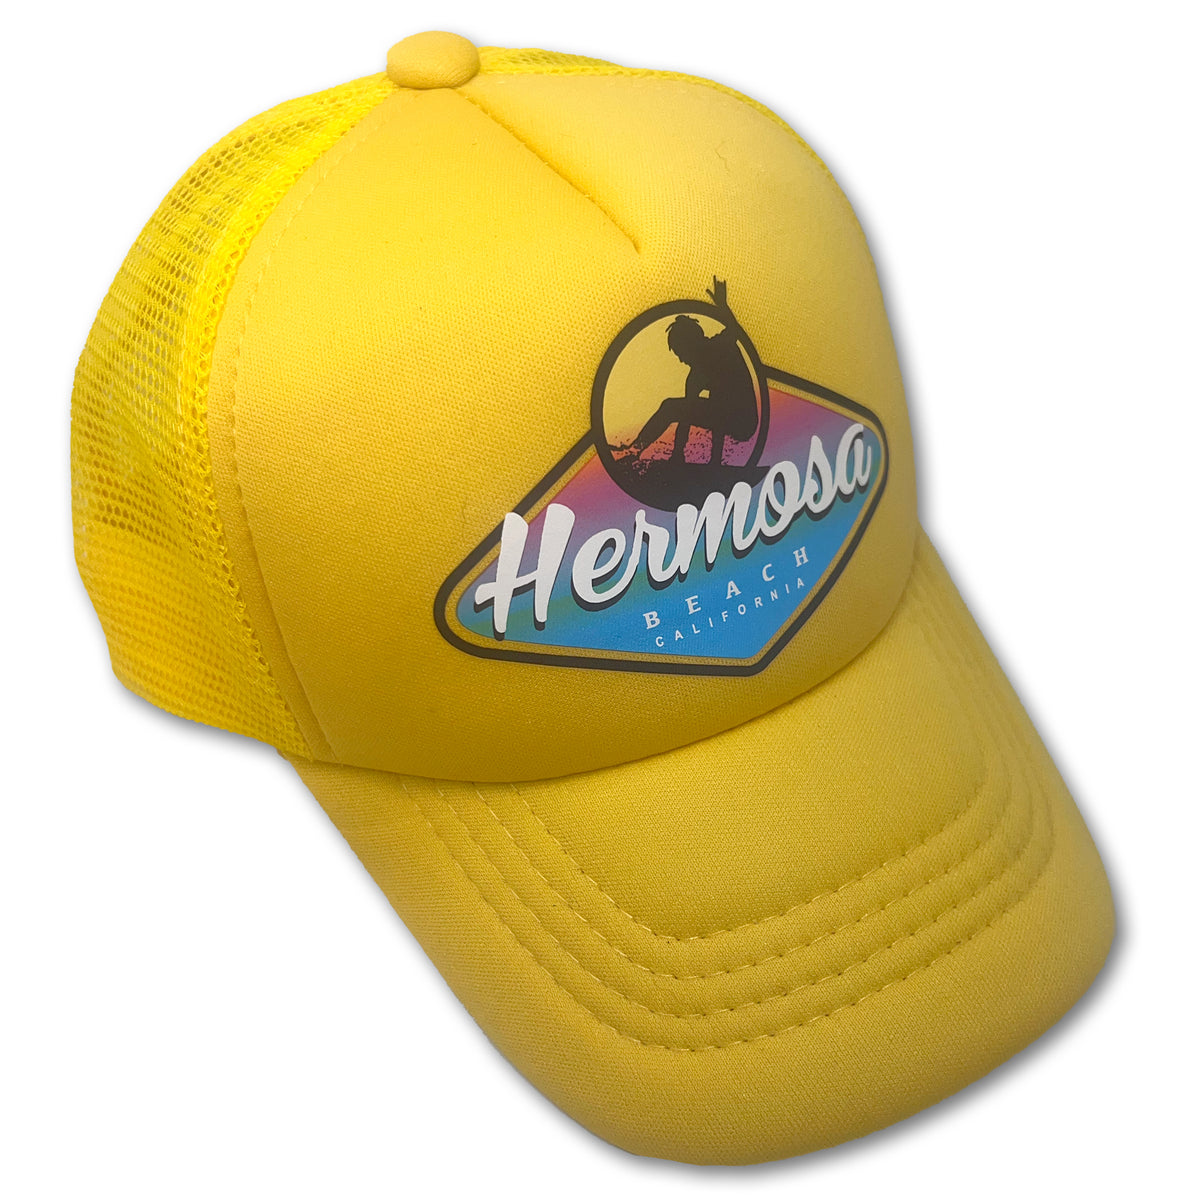 Surf Hermosa Beach Trucker Hat for $17.00 now at Sol Baby!